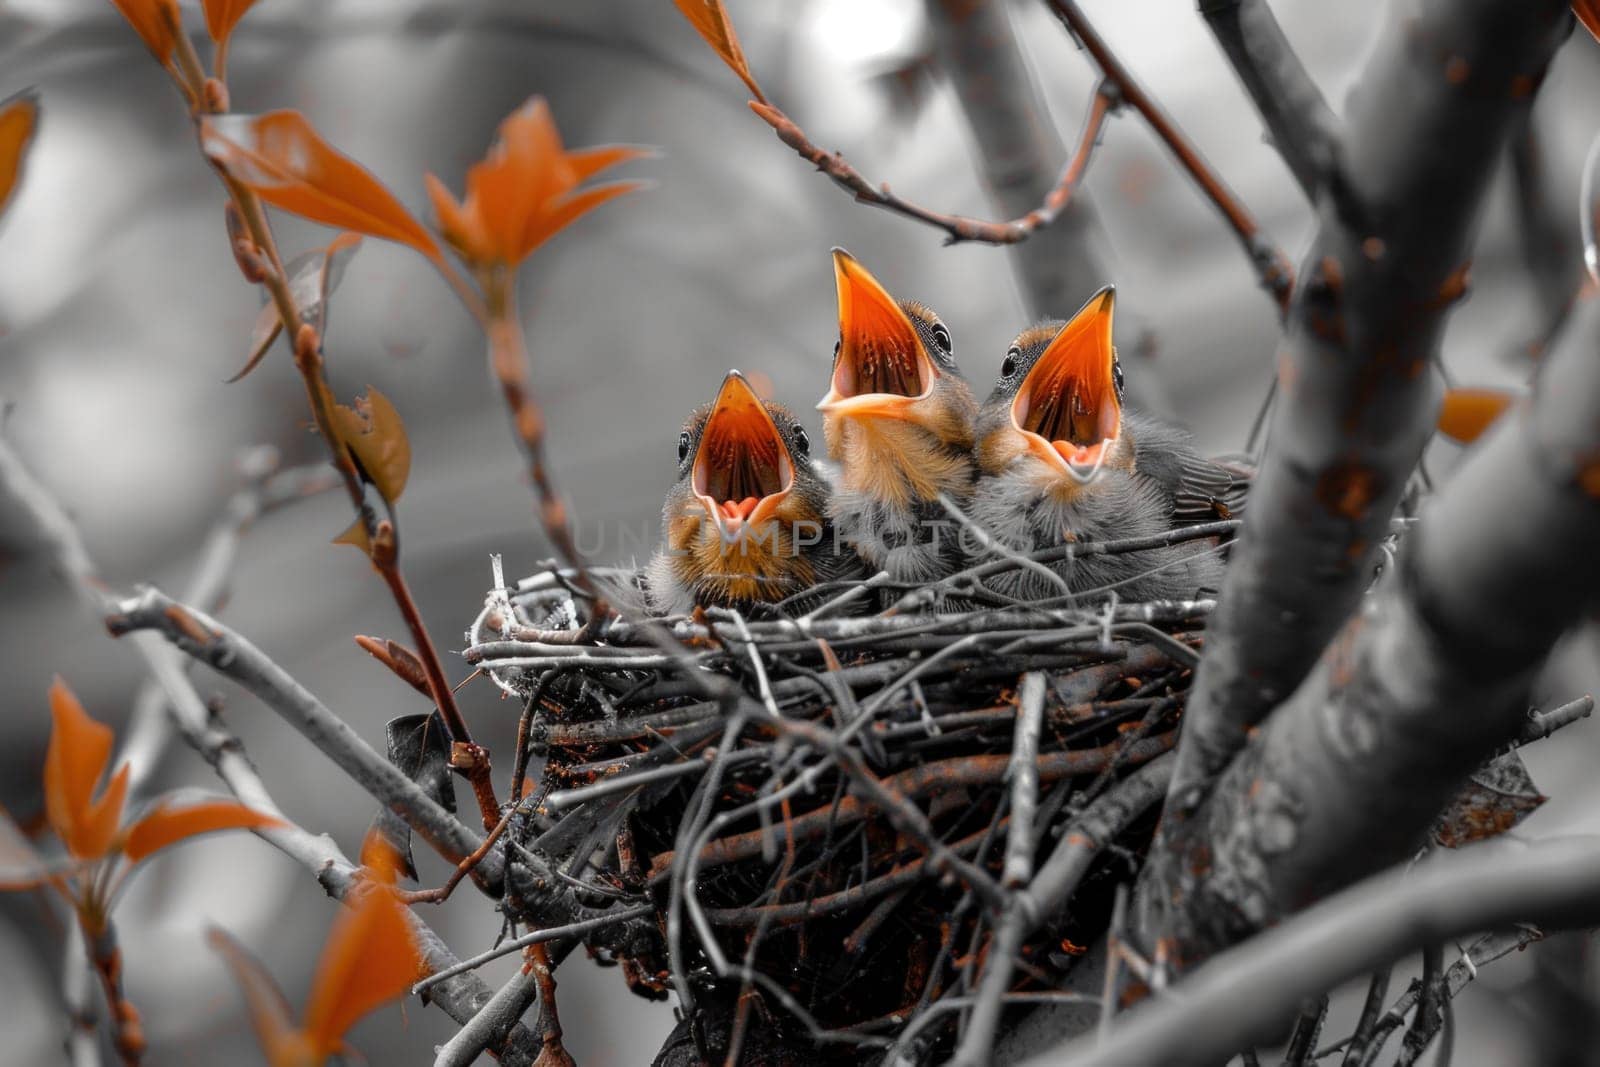 Three baby birds are sitting in a nest, one of which is eating.